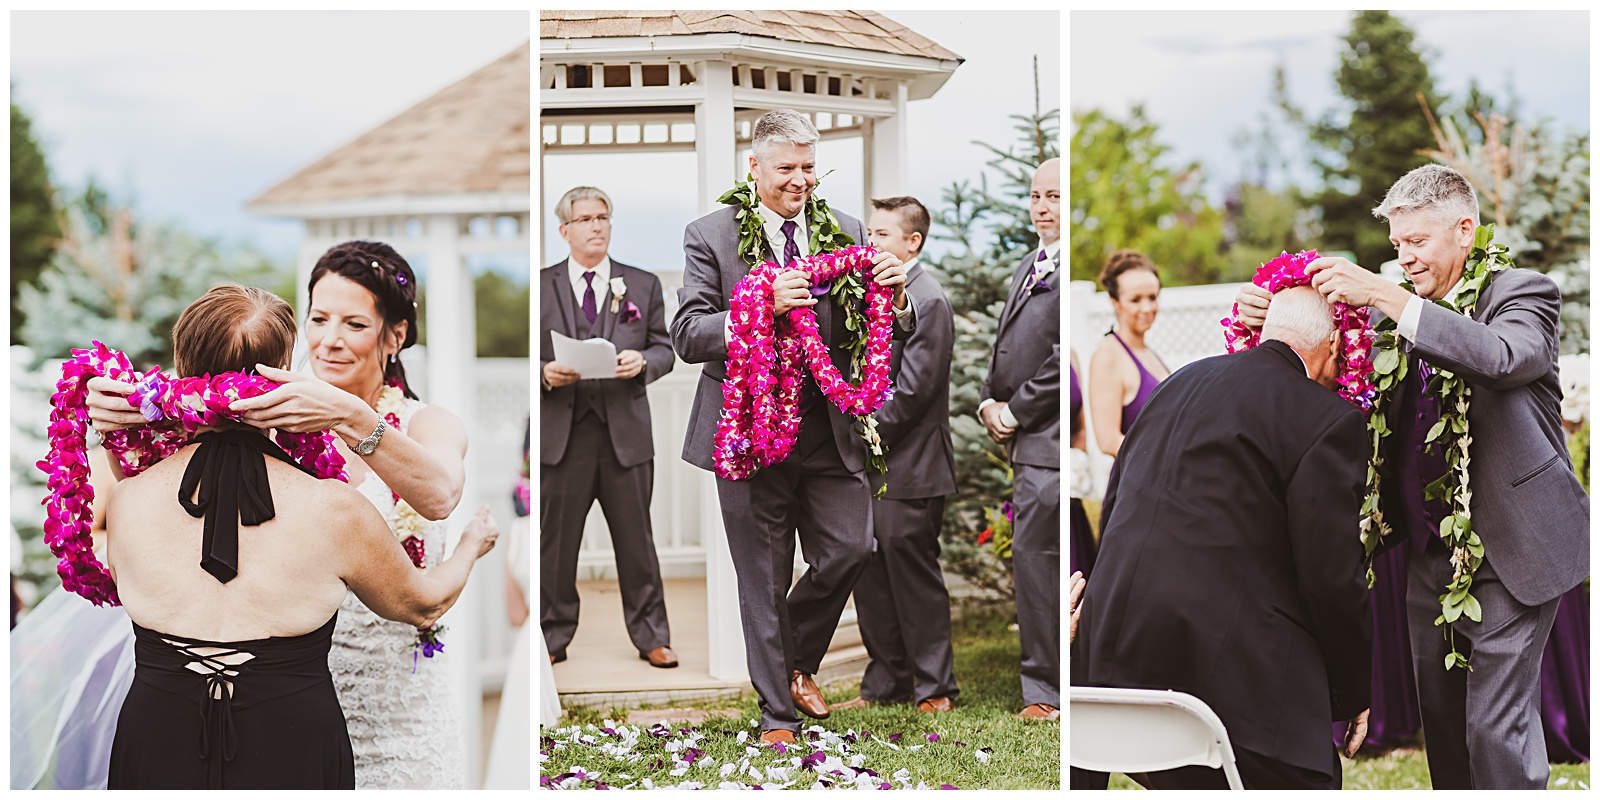 bride and groom giving out leis during wedding ceremony